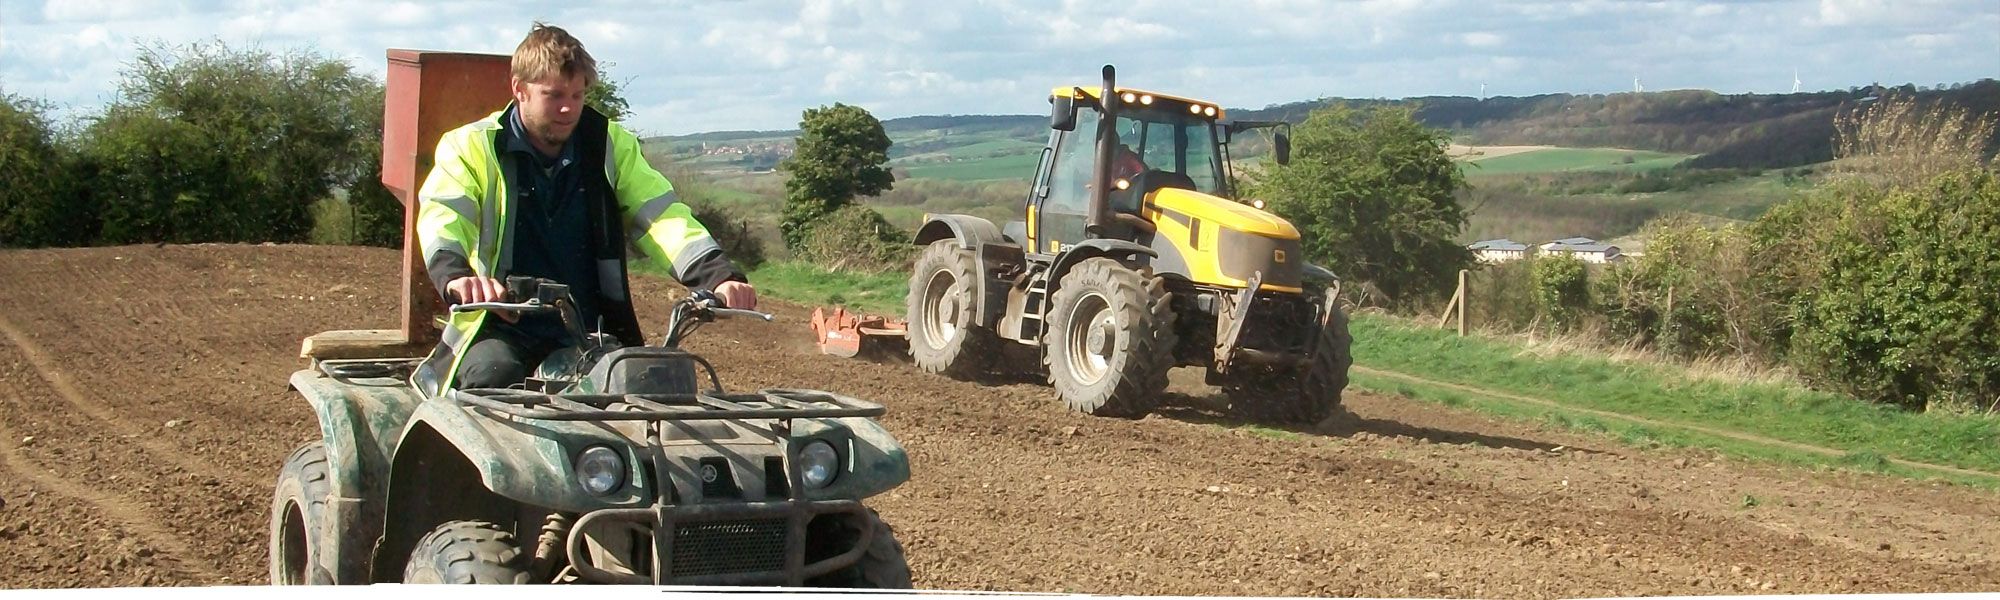 Wildbanks Conservation team on quad bike and tractor